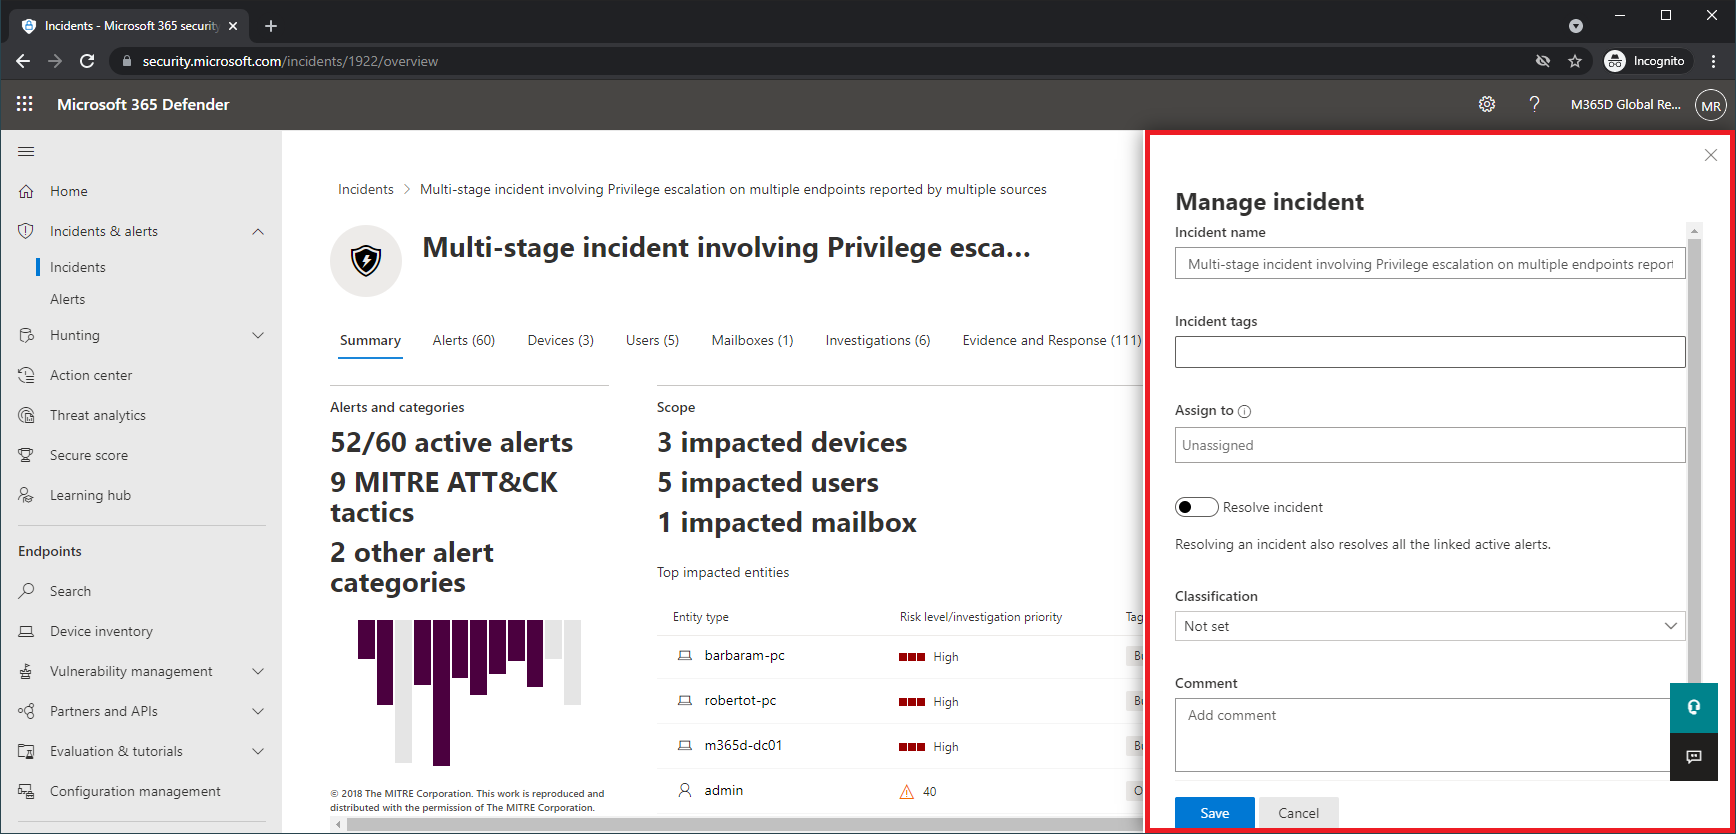 Example of the Manage incident pane of an incident.